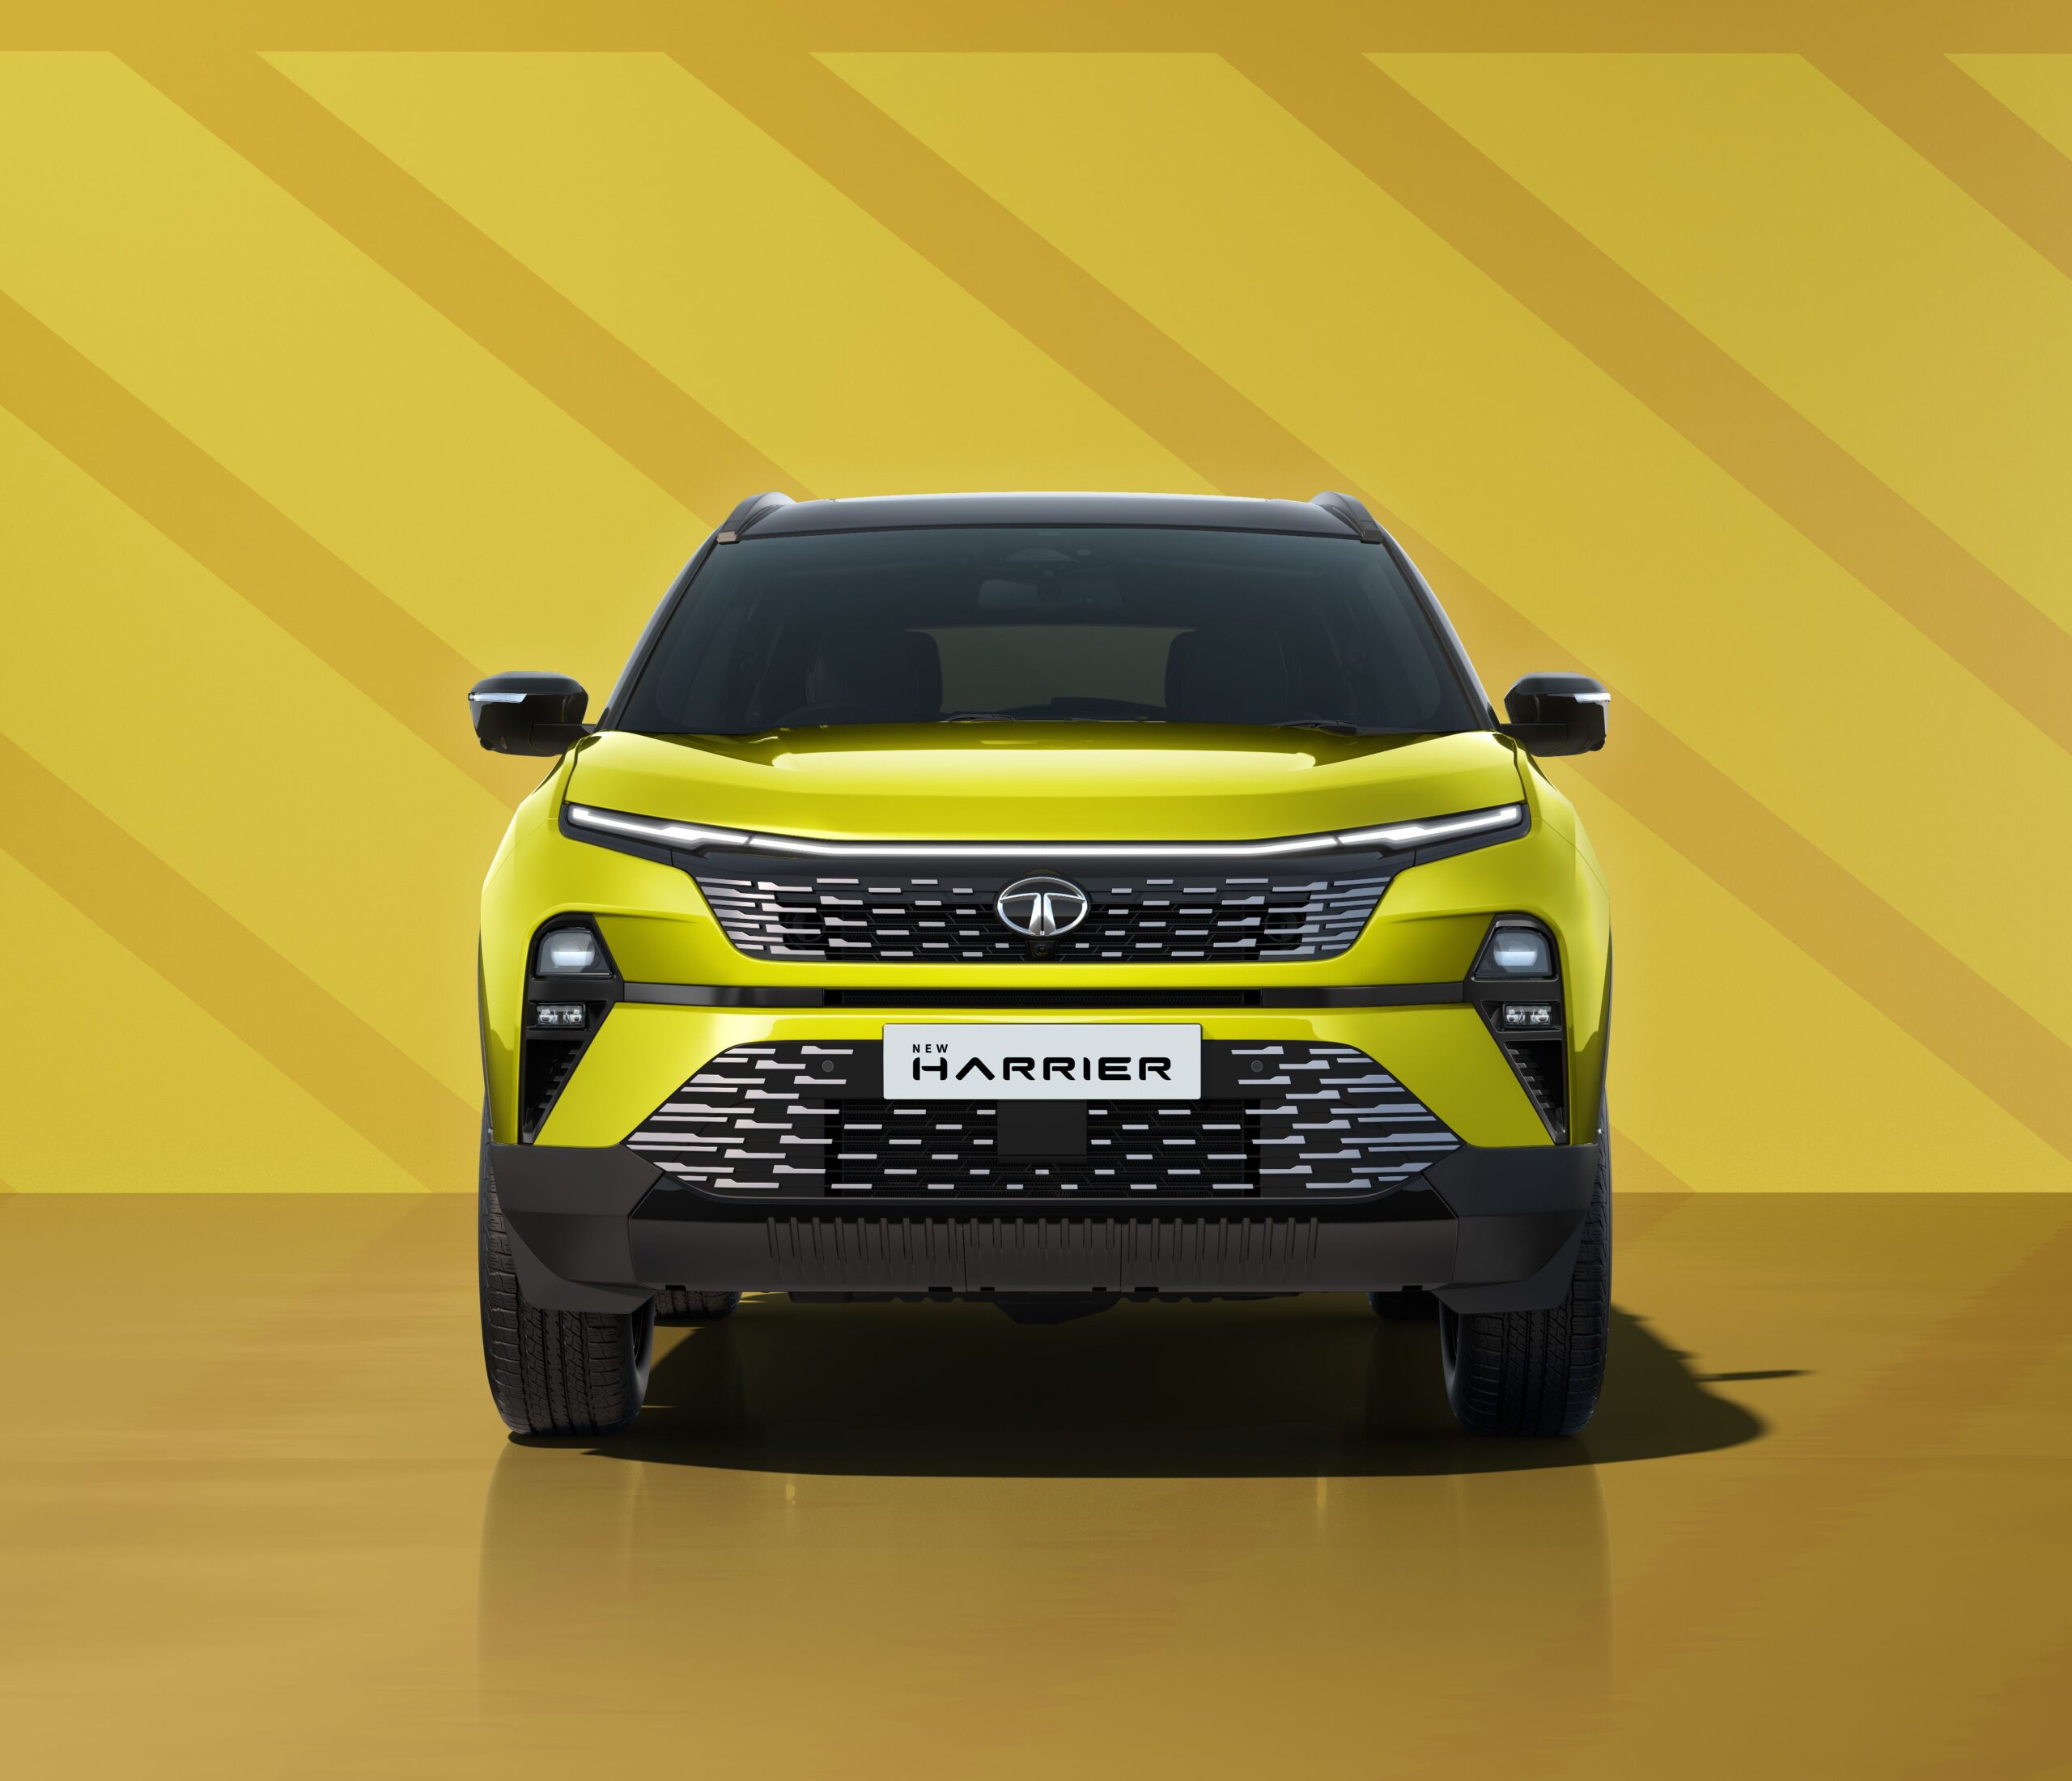 Tata Harrier Facelift Officially Launched In India At Rs. 15.49 Lakh